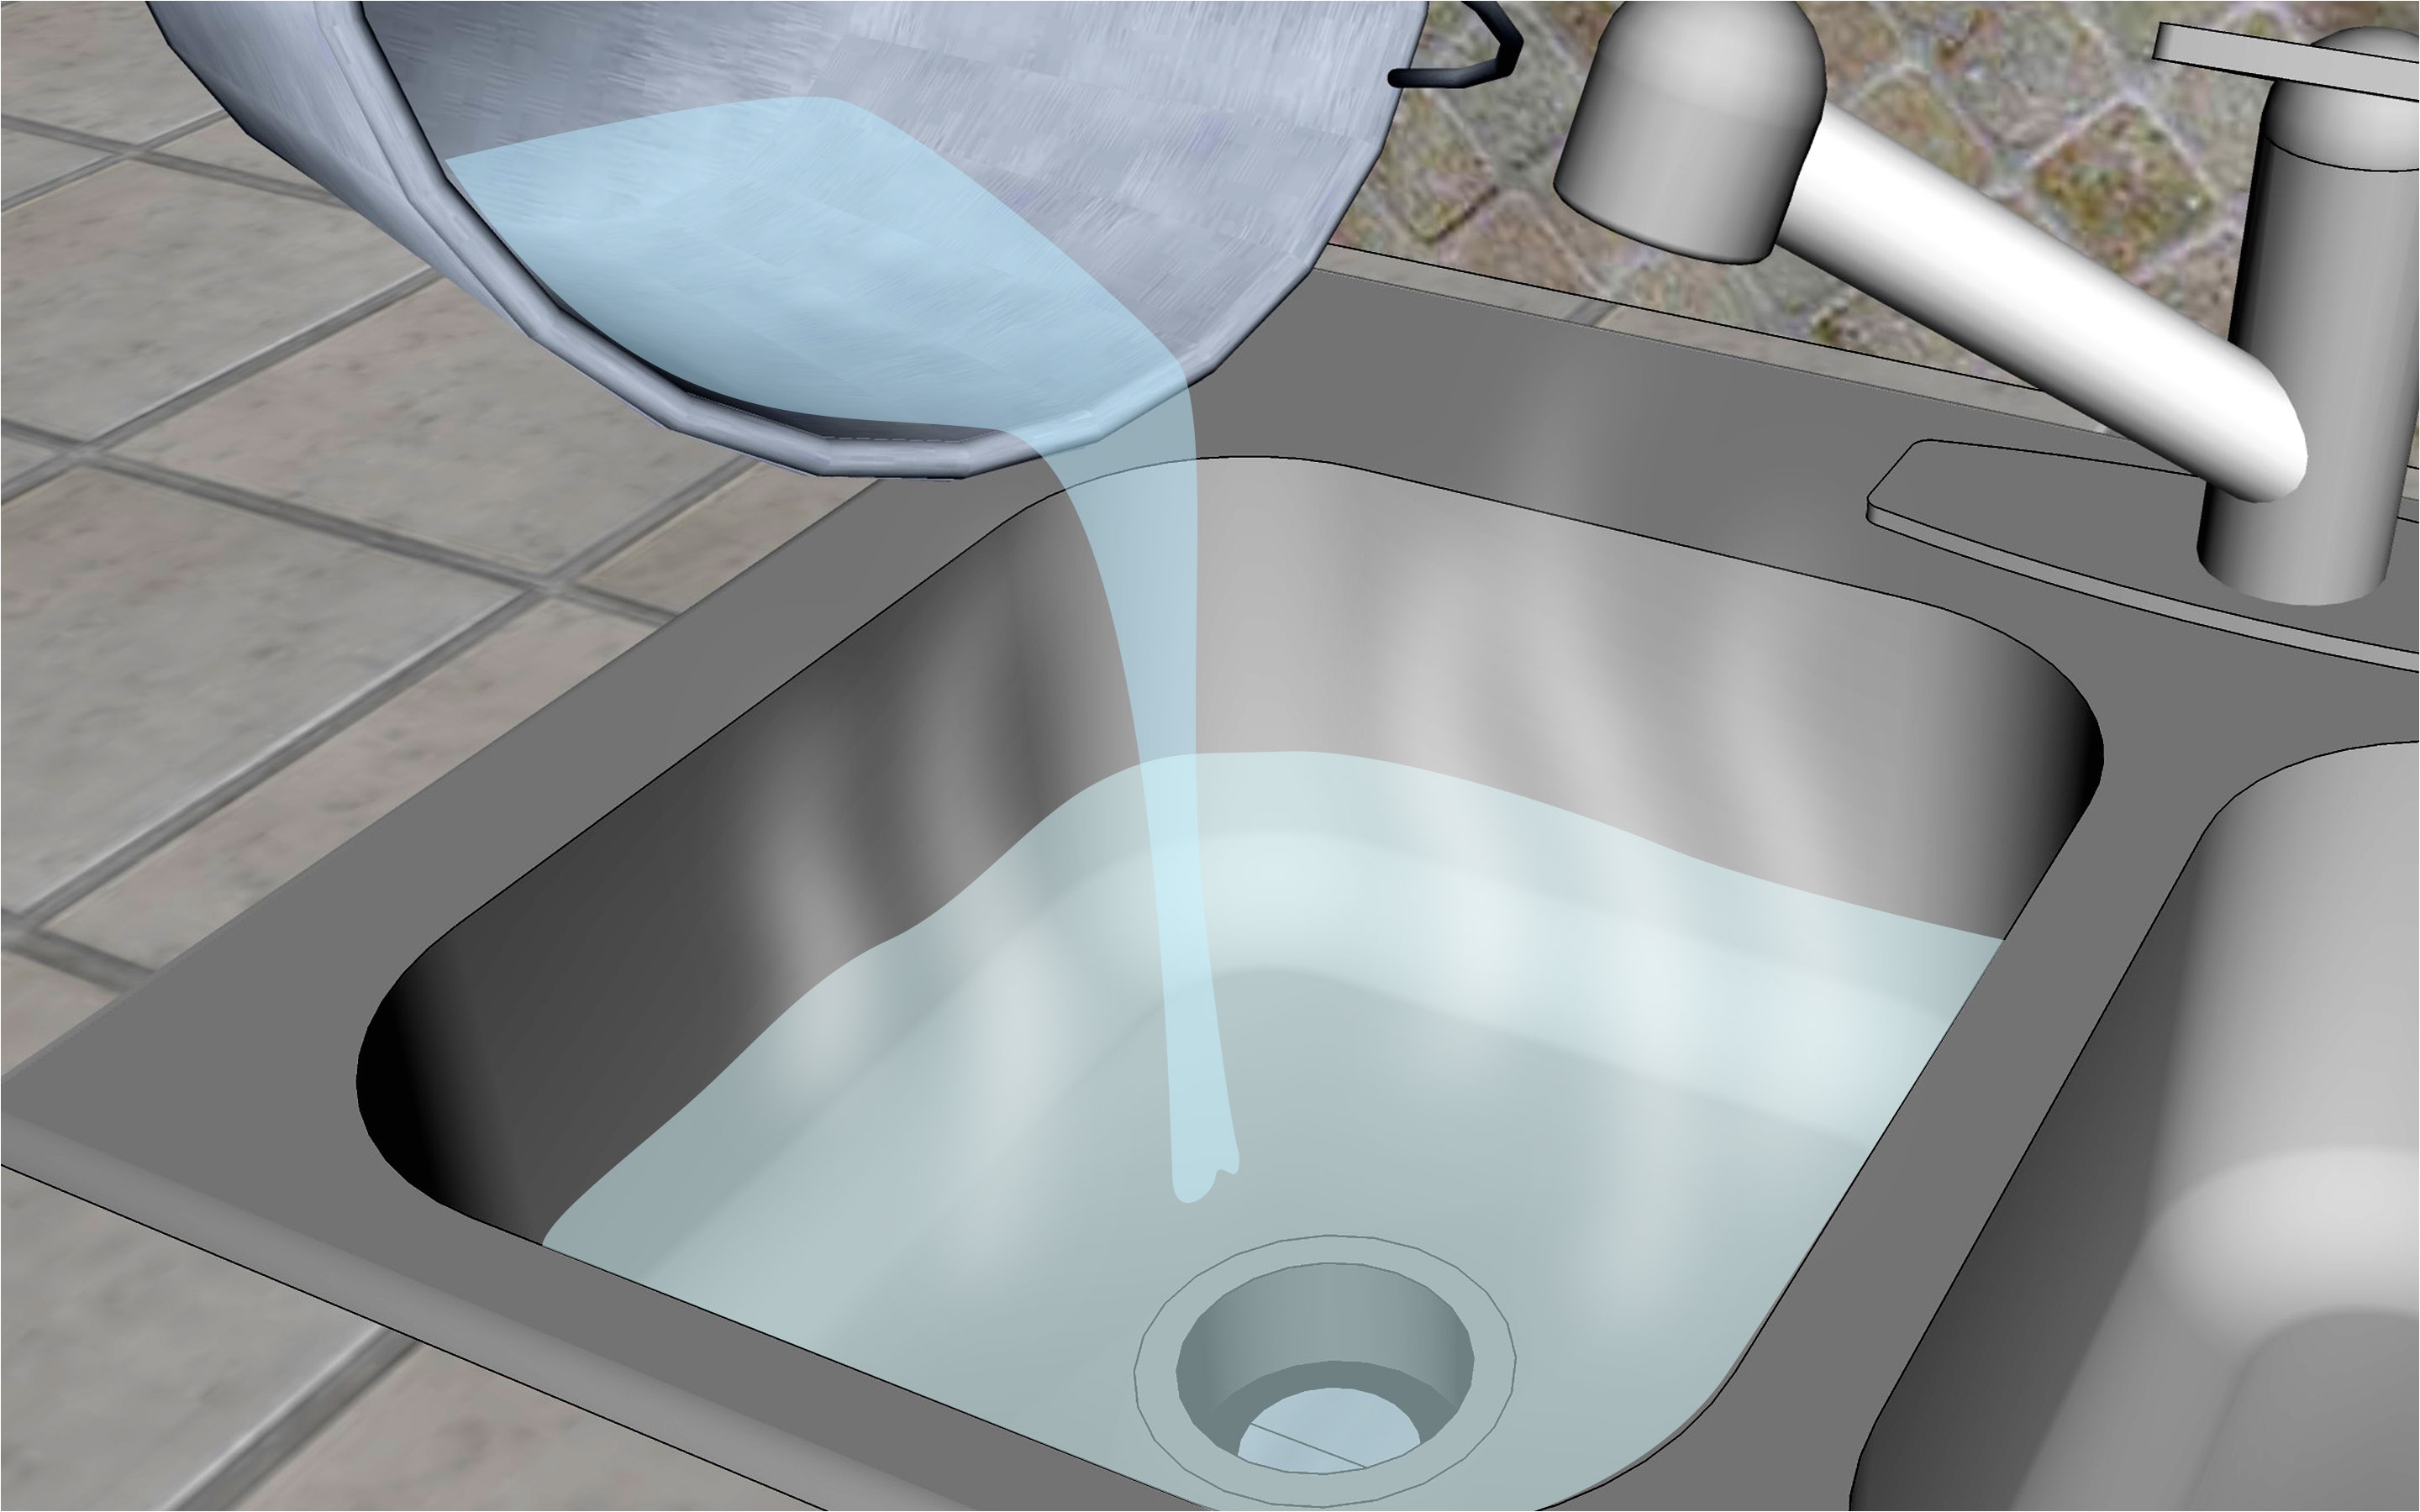 Best Drain Cleaner for Bathtub How to Troubleshoot Plumbing Problems 9 Steps with Pictures